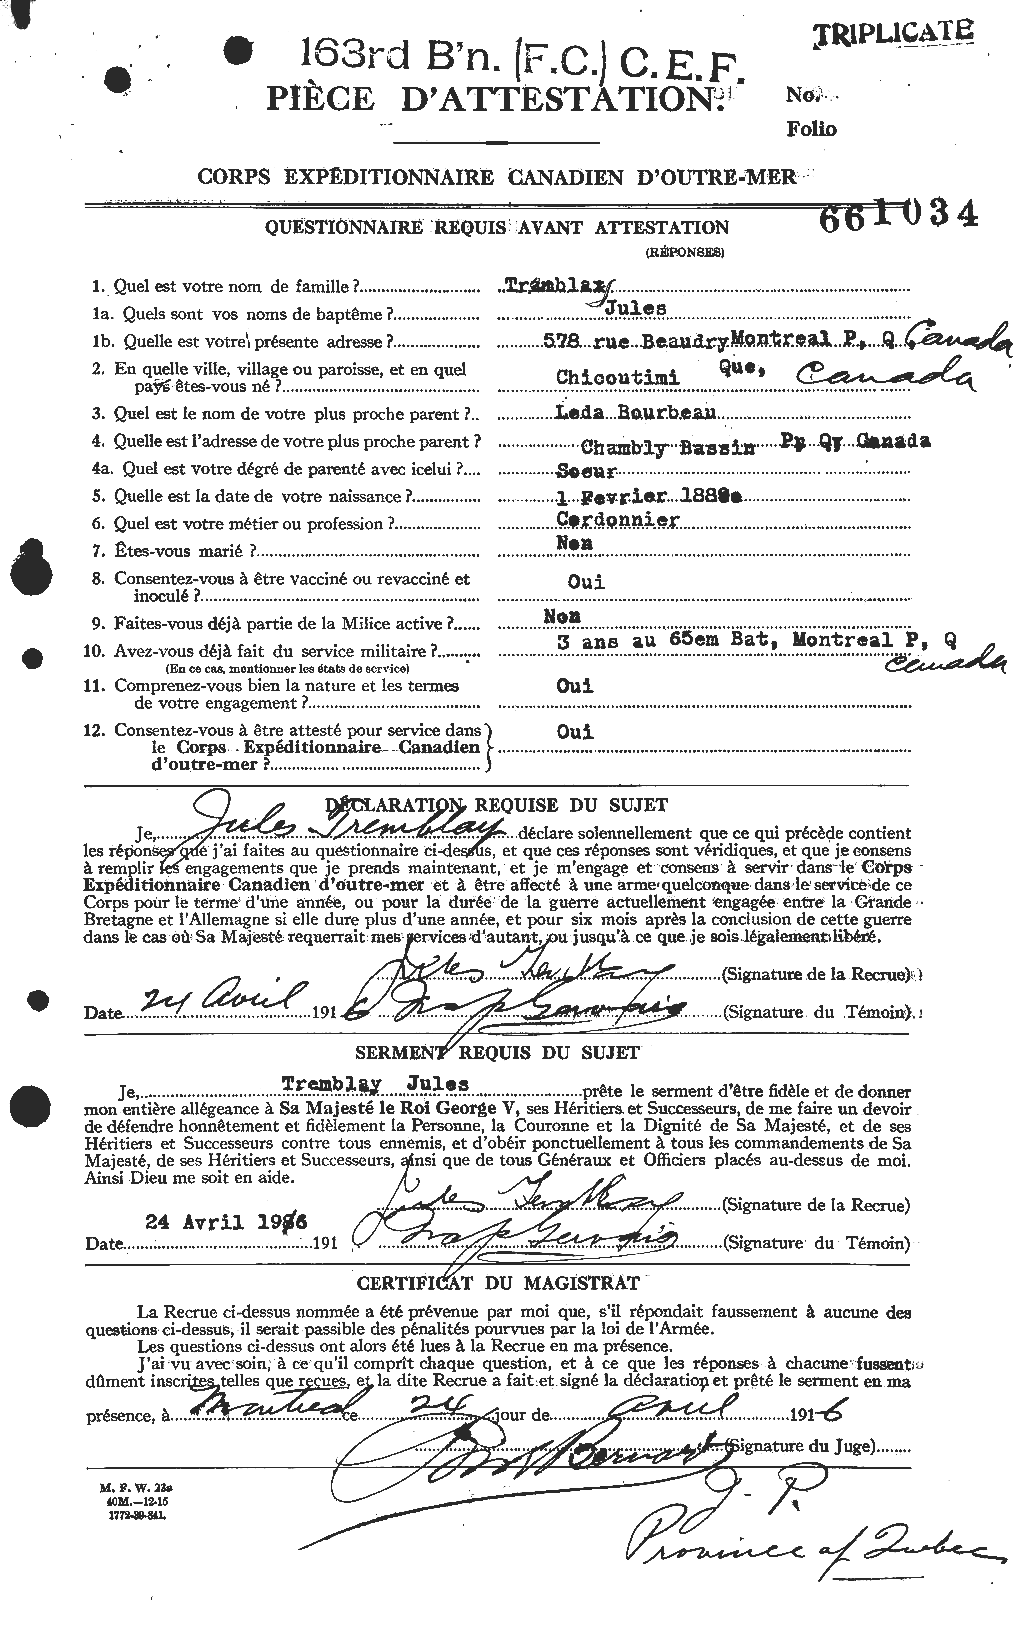 Personnel Records of the First World War - CEF 639172a